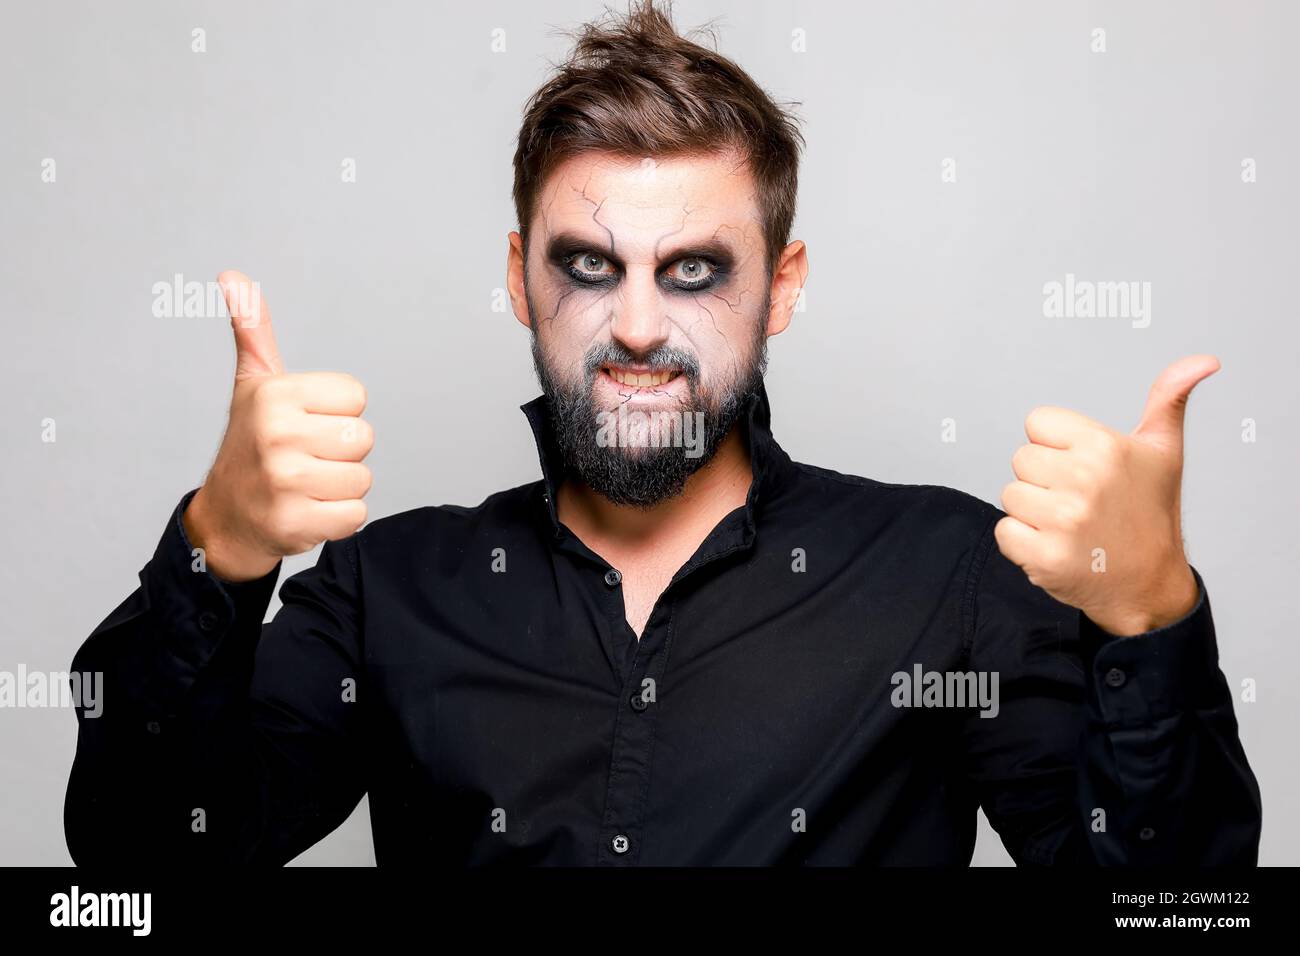 Bearded man with undead makeup gives a thumbs up Stock Photo